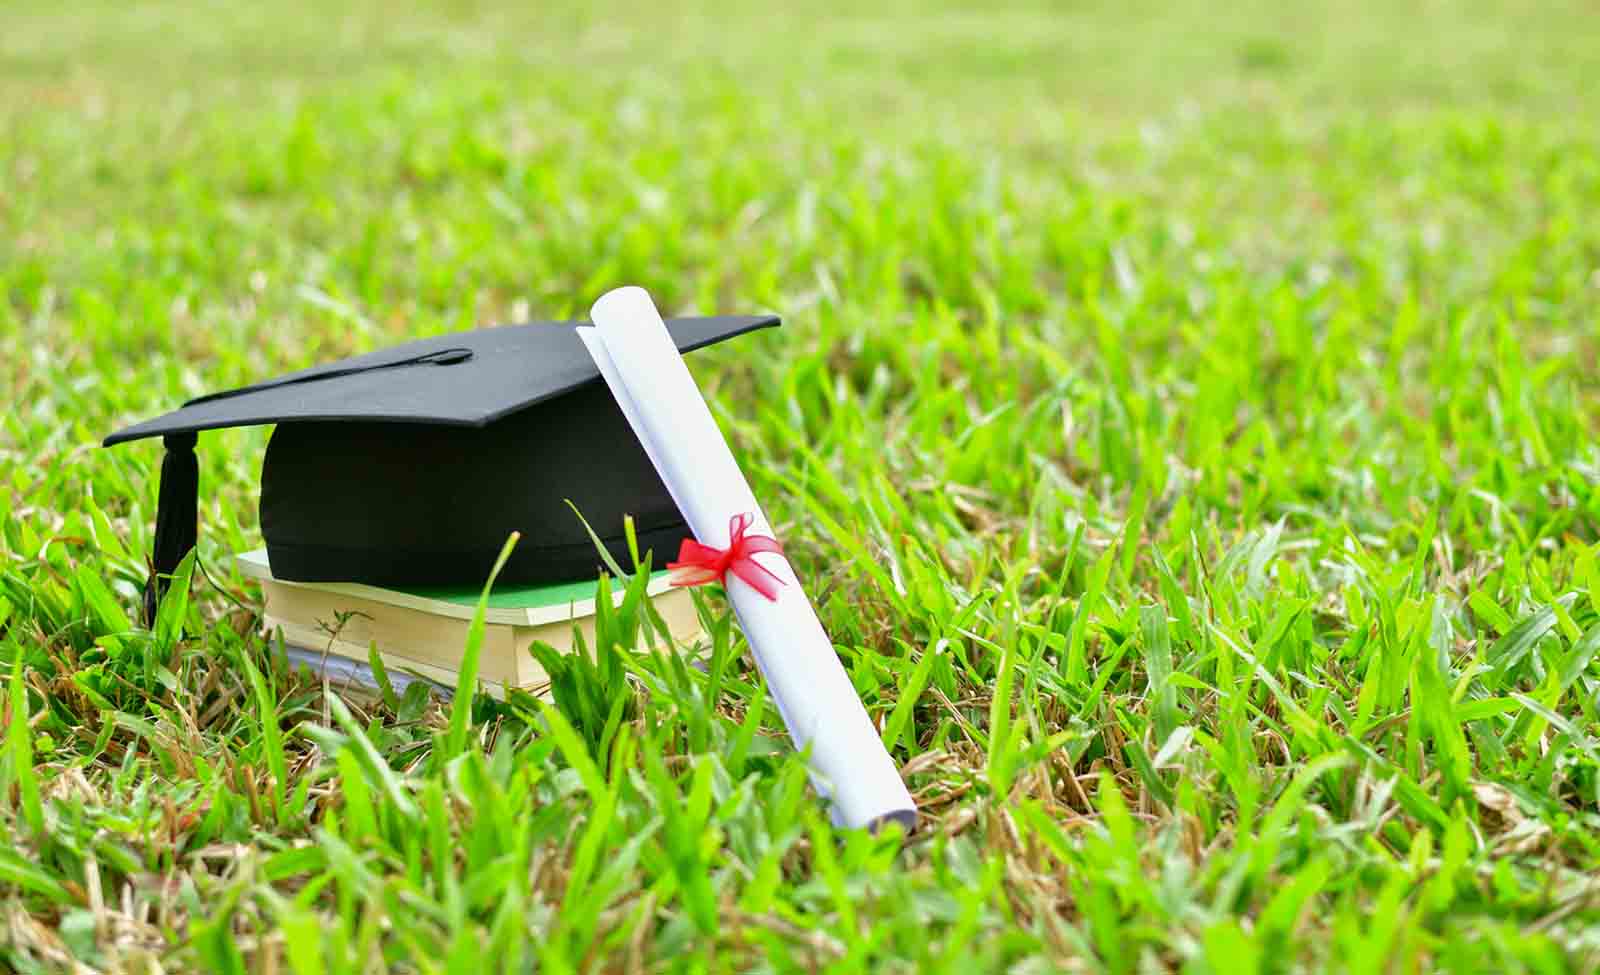 How Soon Can You Refinance a Student Loan After Graduating?